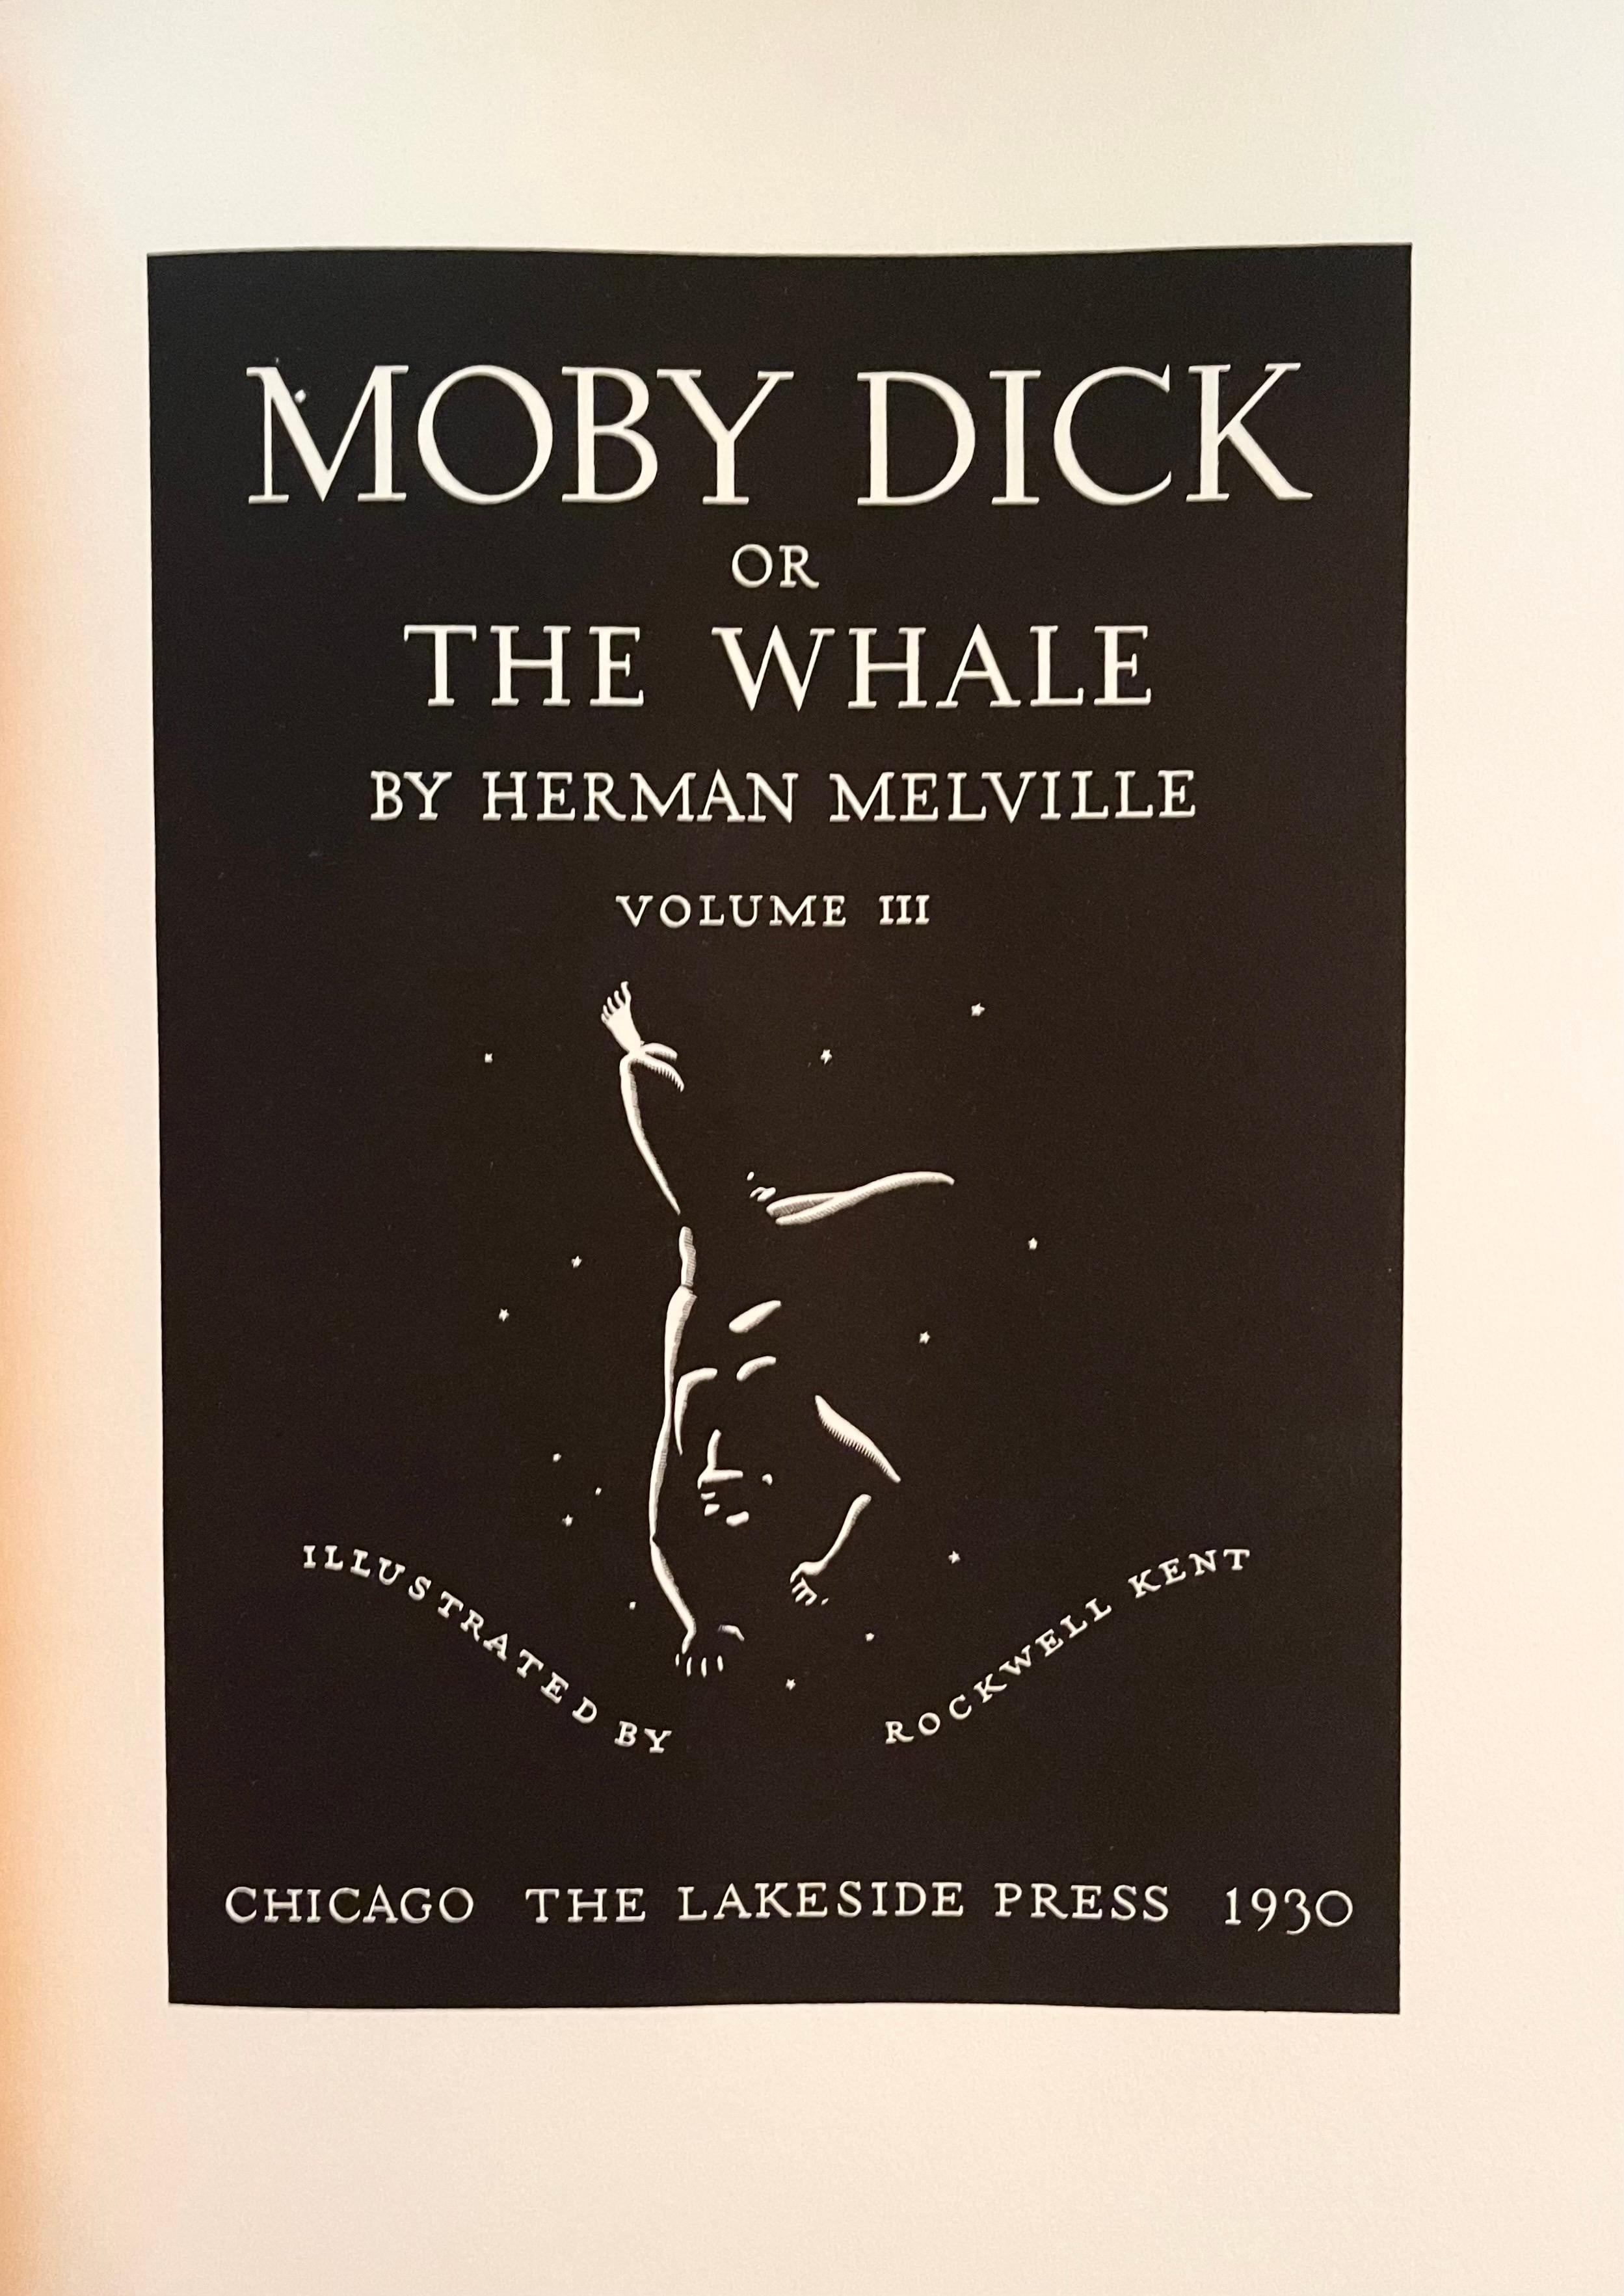 Kent, Rockwell, illustrator. MOBY DICK by Herman Melville. .Lakeside Press, 1930. The Artist and the Book, 140. Edition of 1000 copies. First edition thus. Three volumes, quarto, 279, 284, and 282pp. 280 illustrations by Kent after his ink and wash